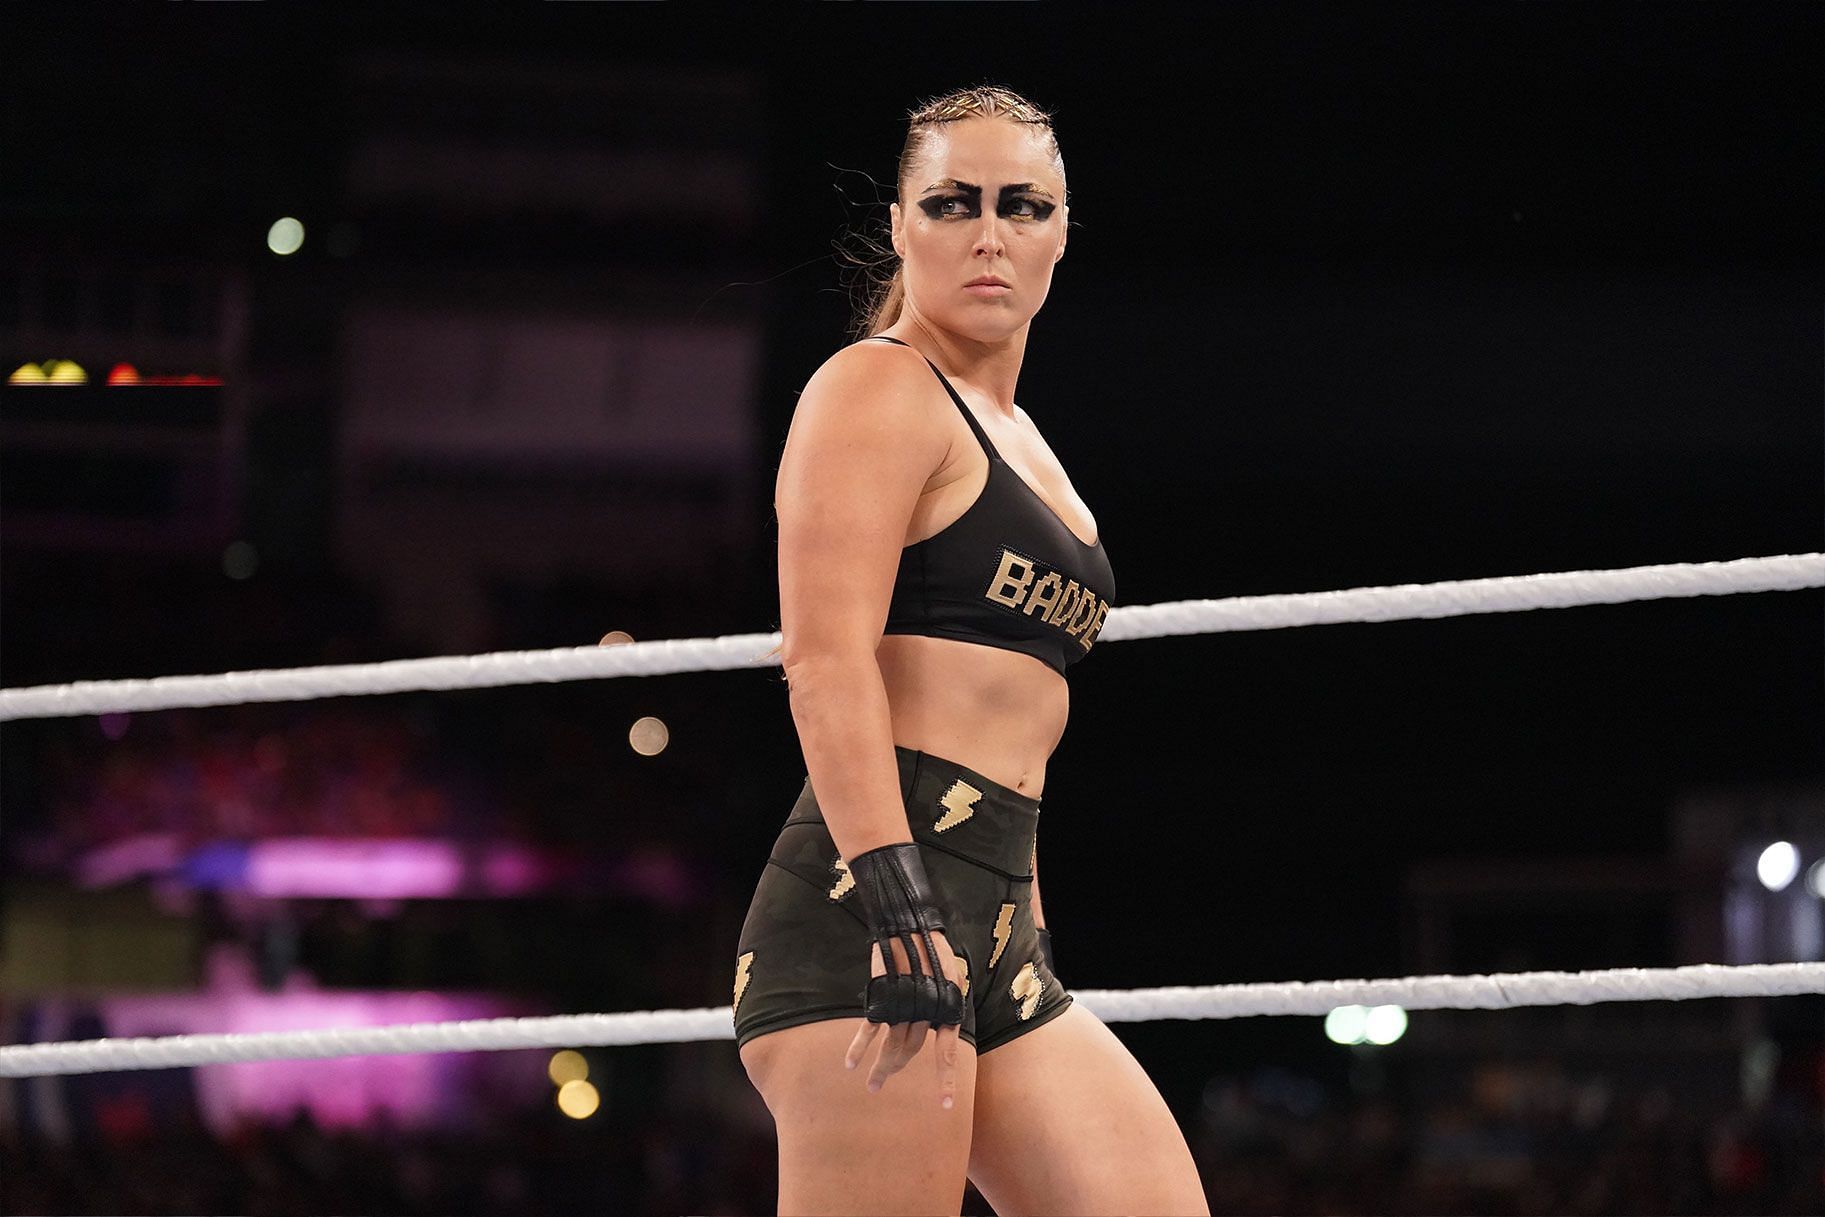 Ronda Rousey returned on the February 10th edition of WWE SmackDown